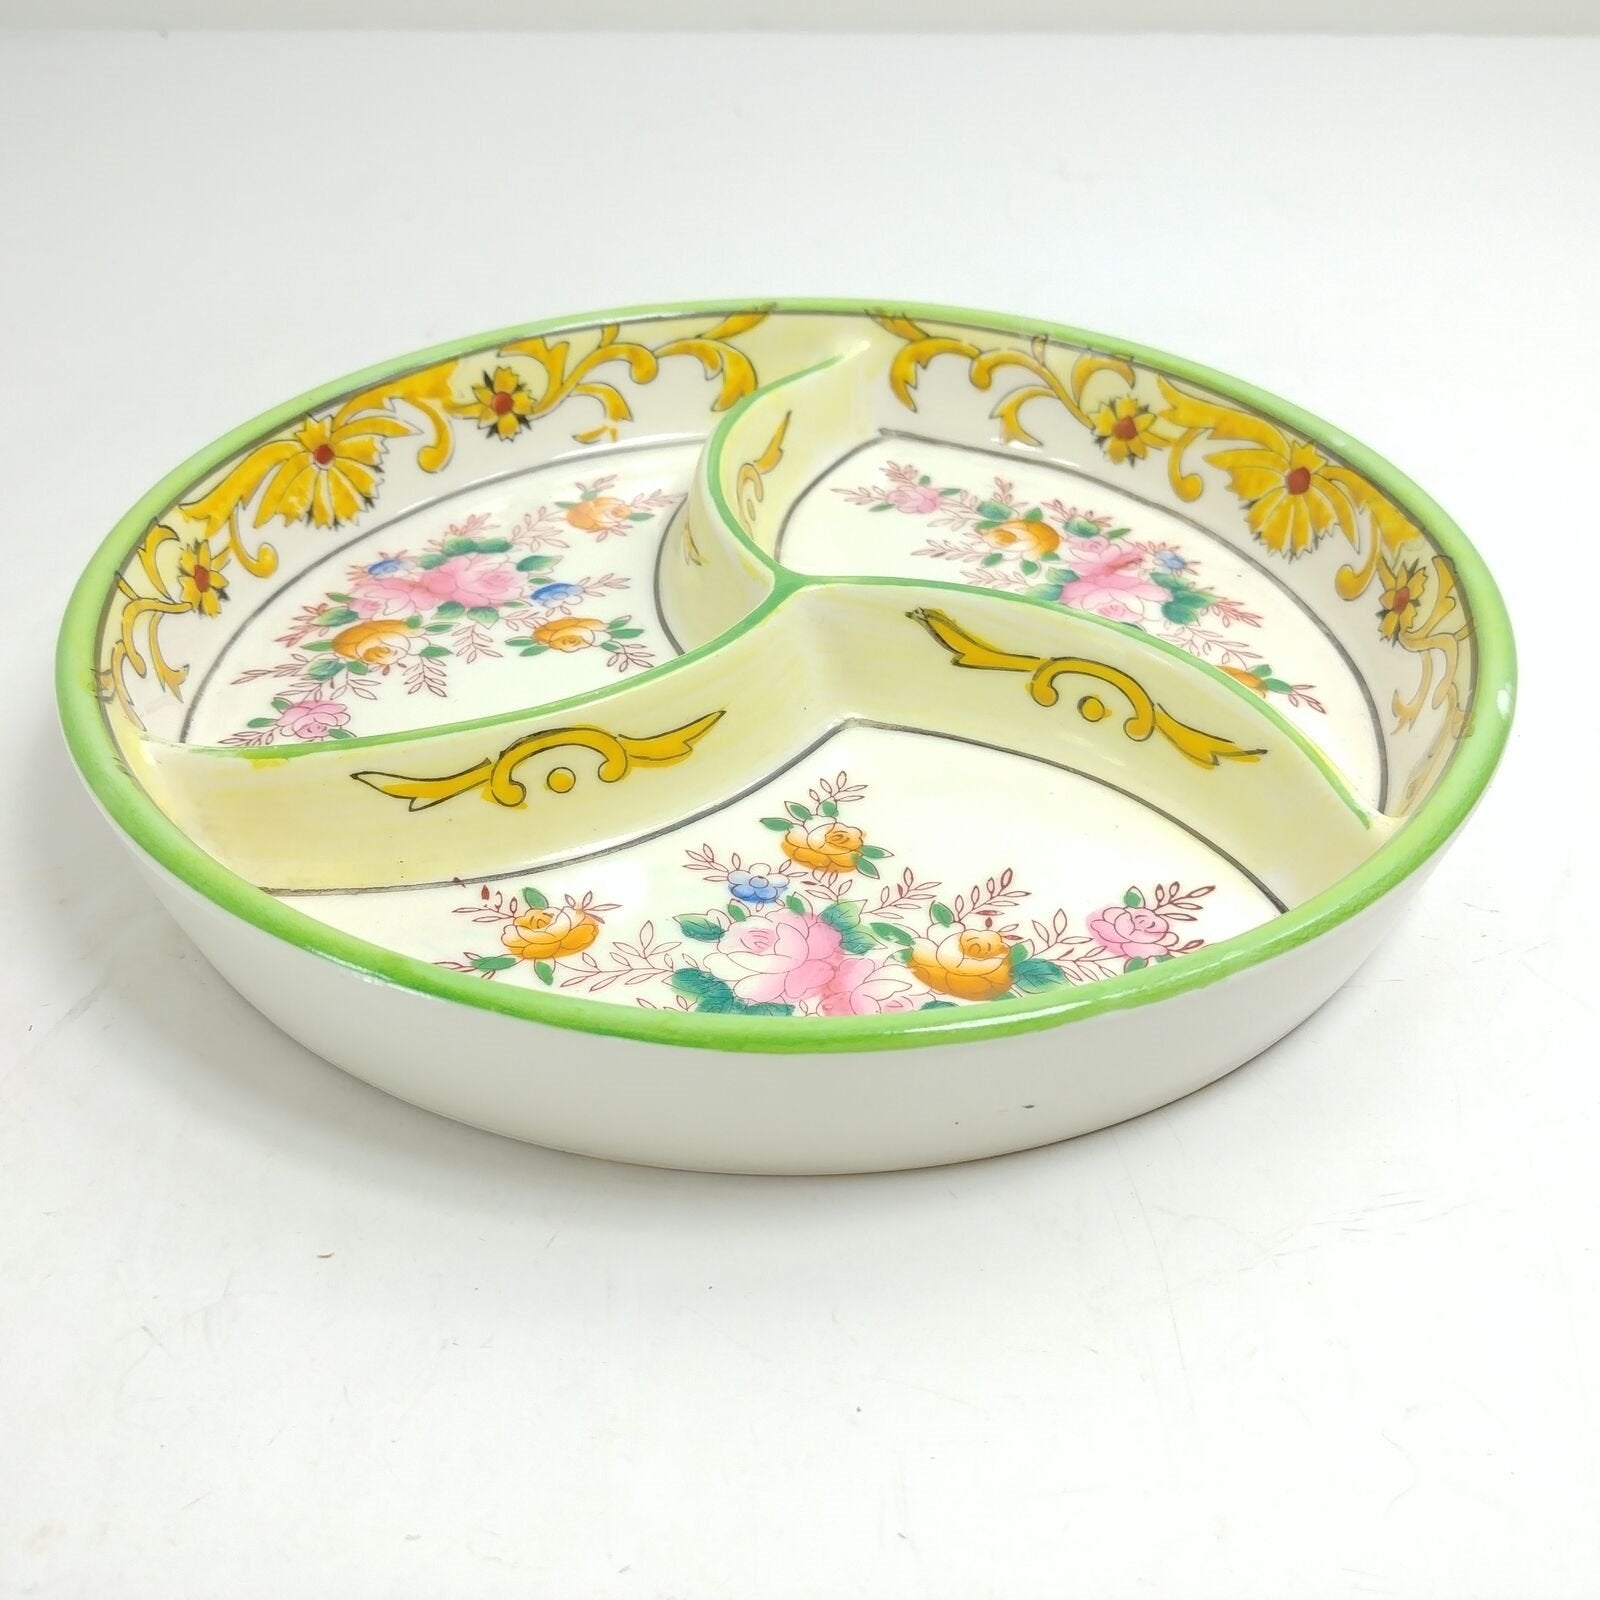 Asian Japanese 3 Sectioned Serving Dish Hallmark Stamped Hand-painted